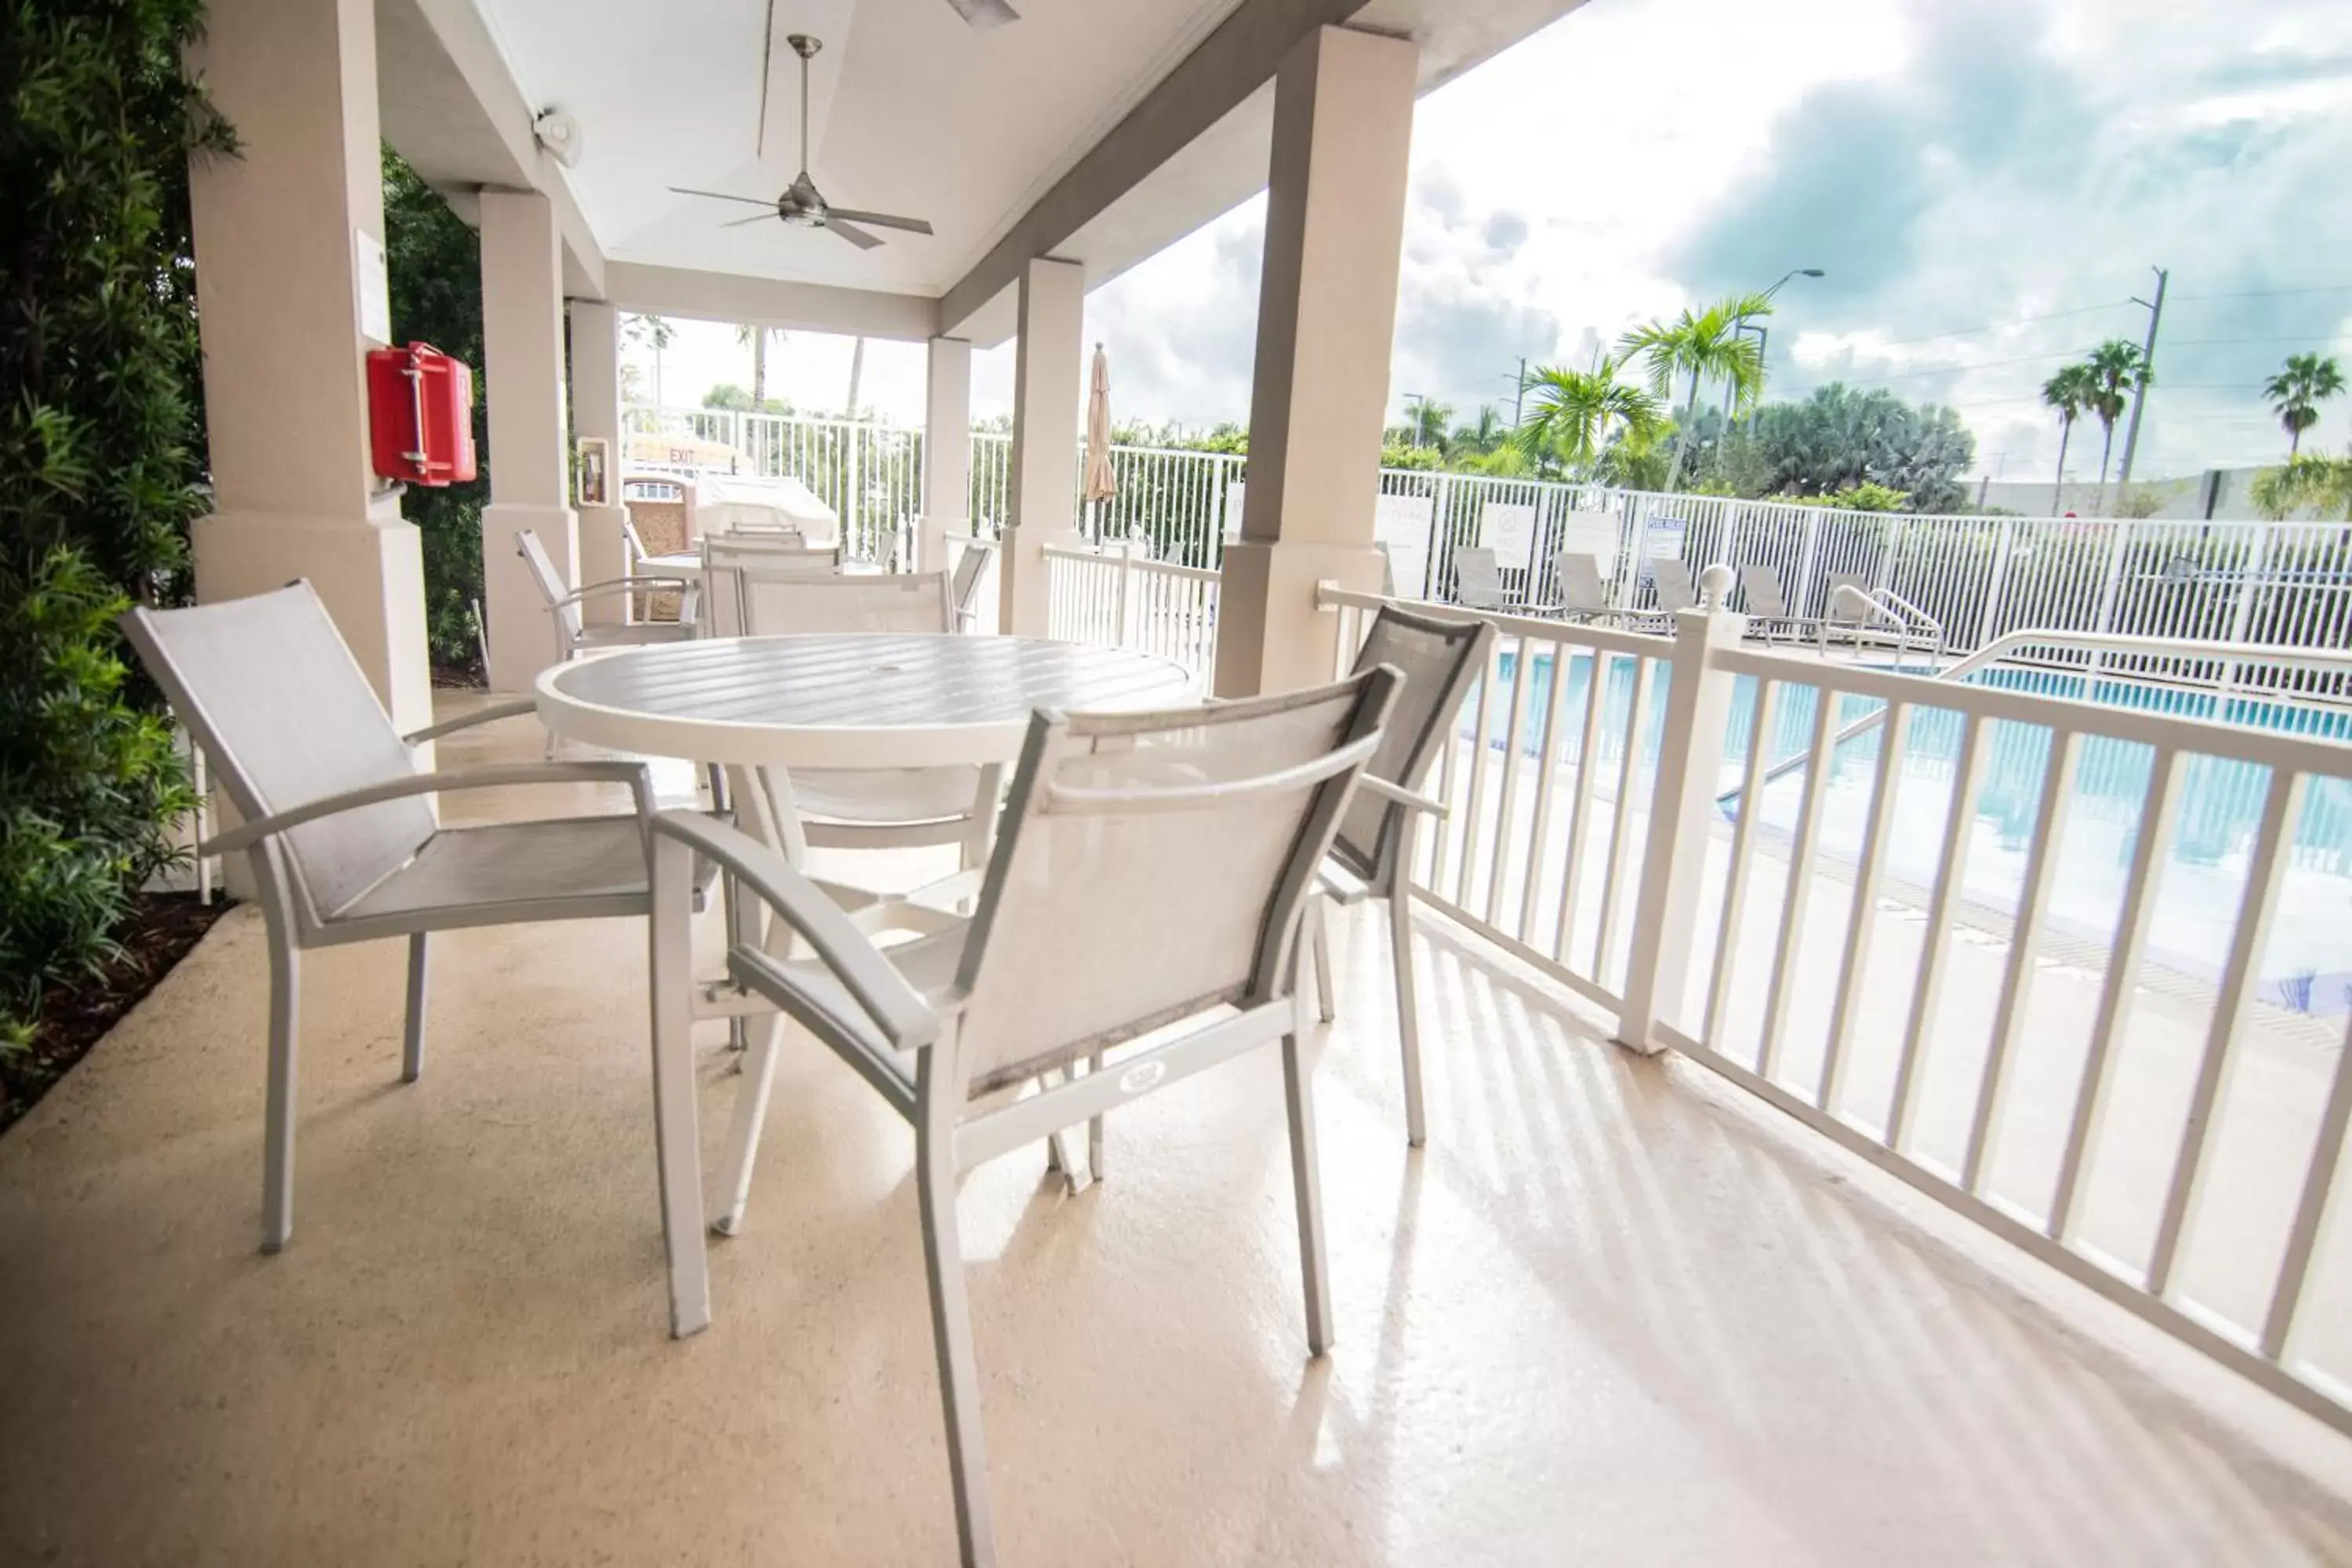 Patio, Balcony/Terrace in Candlewood Suites Miami Intl Airport - 36th St, an IHG Hotel